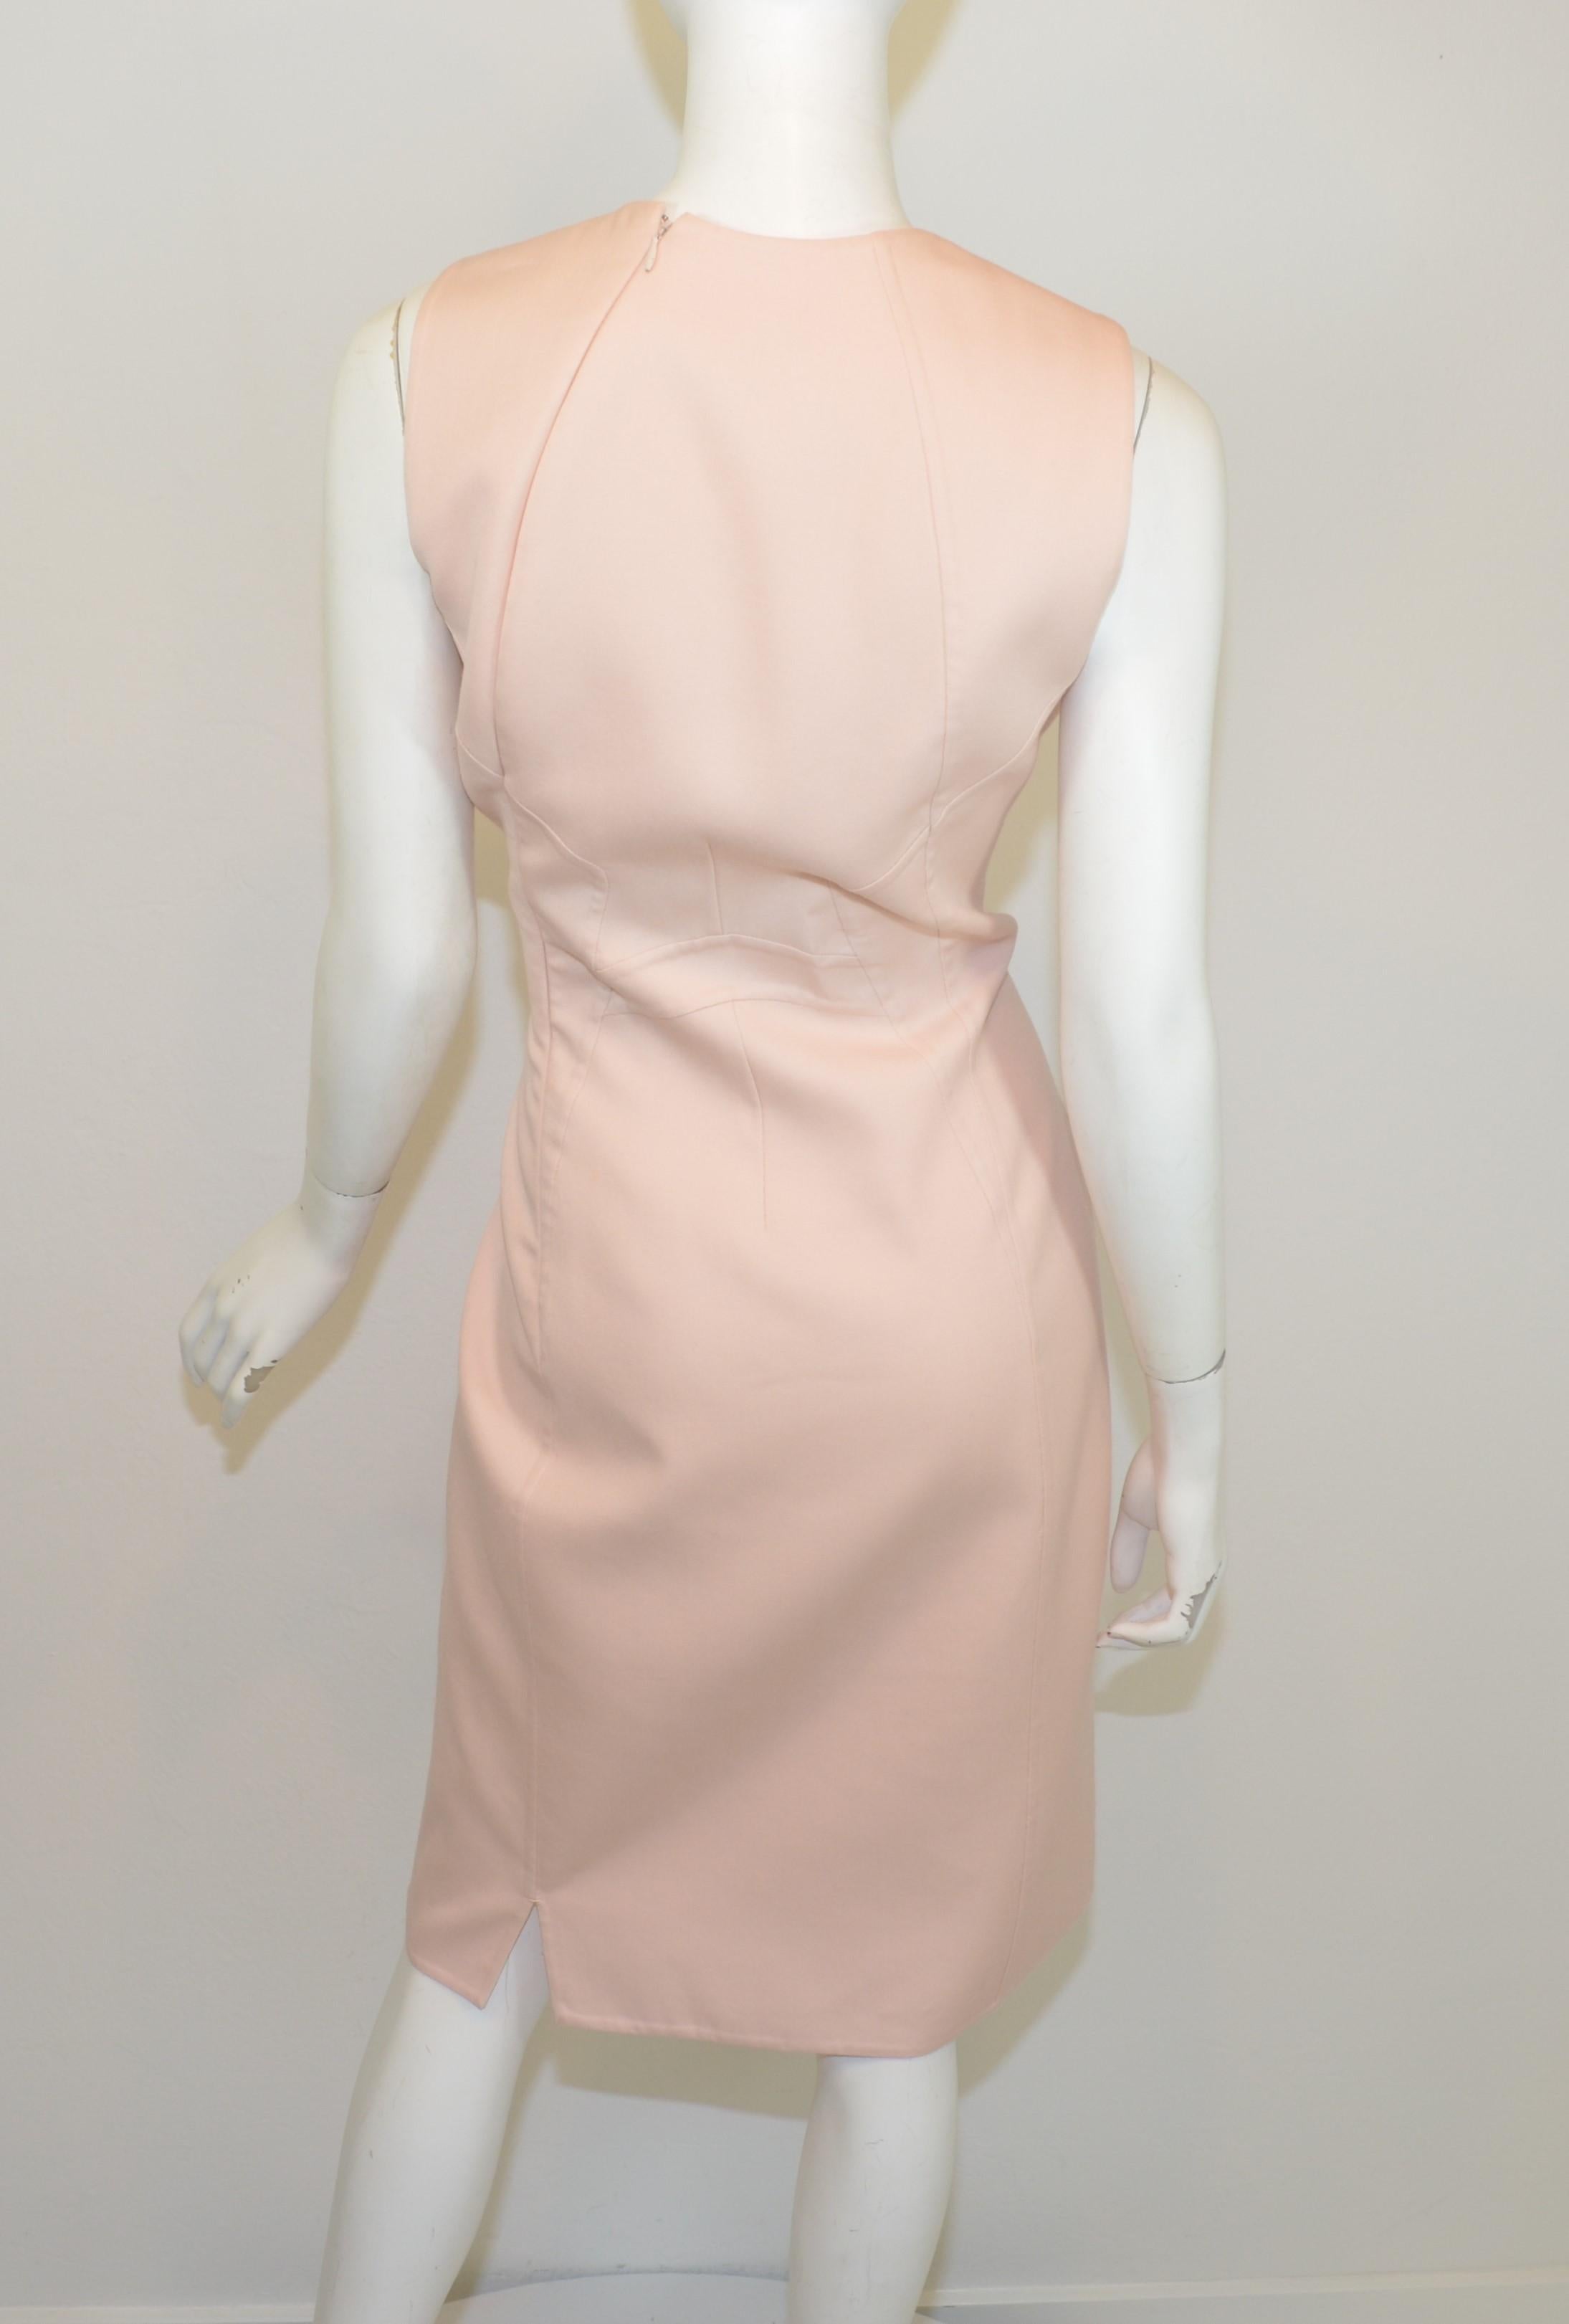 CHADO Ralph Rucci Pink Coat and Dress Ensemble Set In Excellent Condition In Carmel, CA